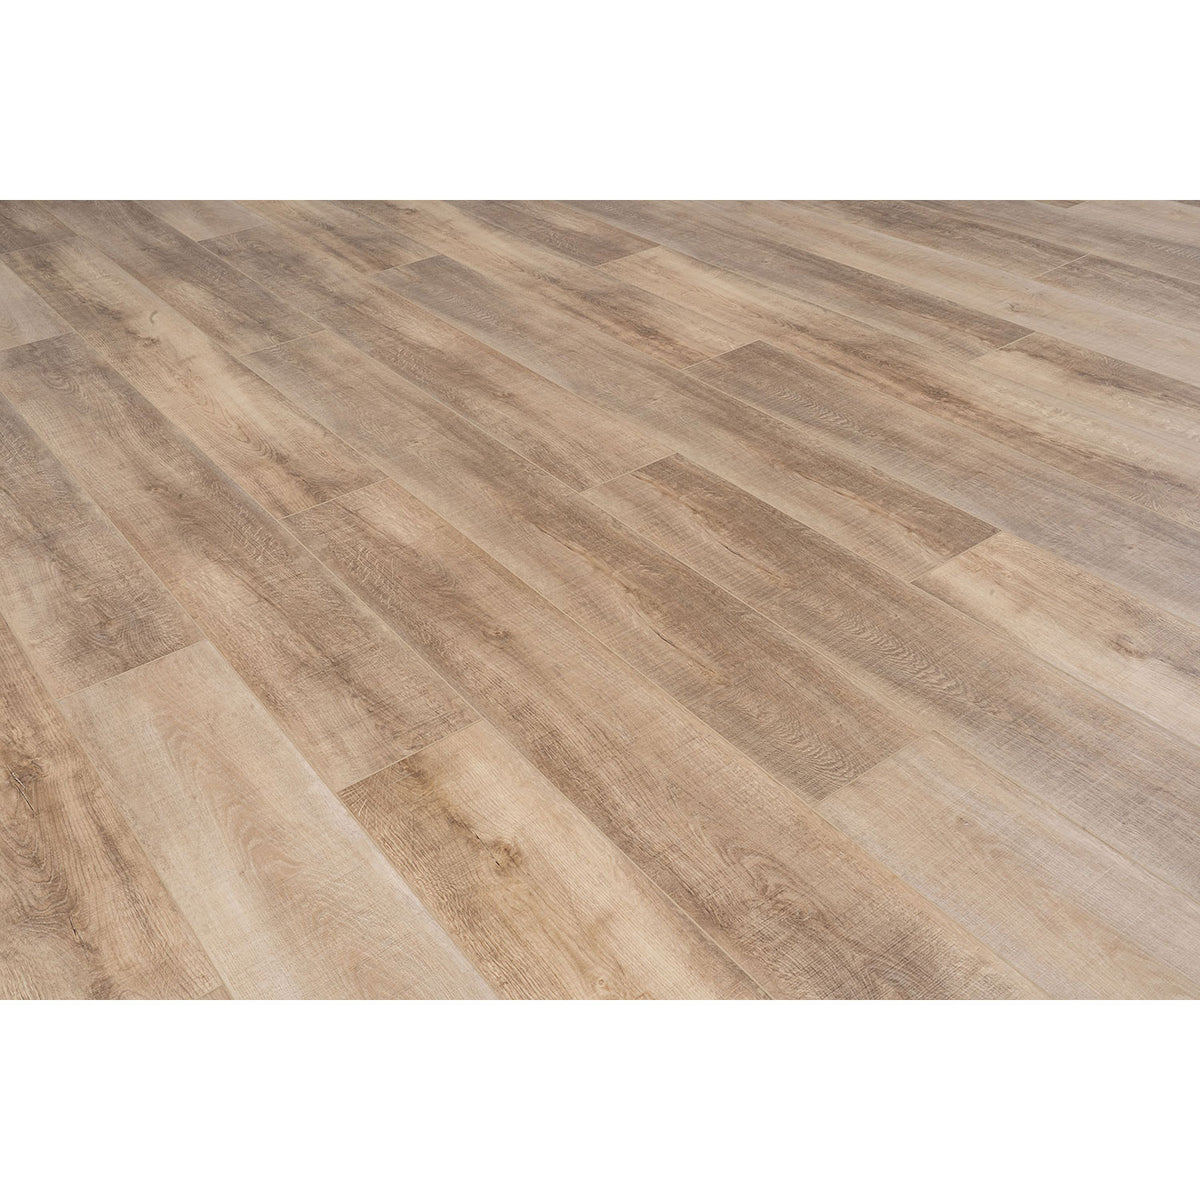 Provenza Floors - Moda Living Luxury Vinyl Plank - After Party Extra View 2